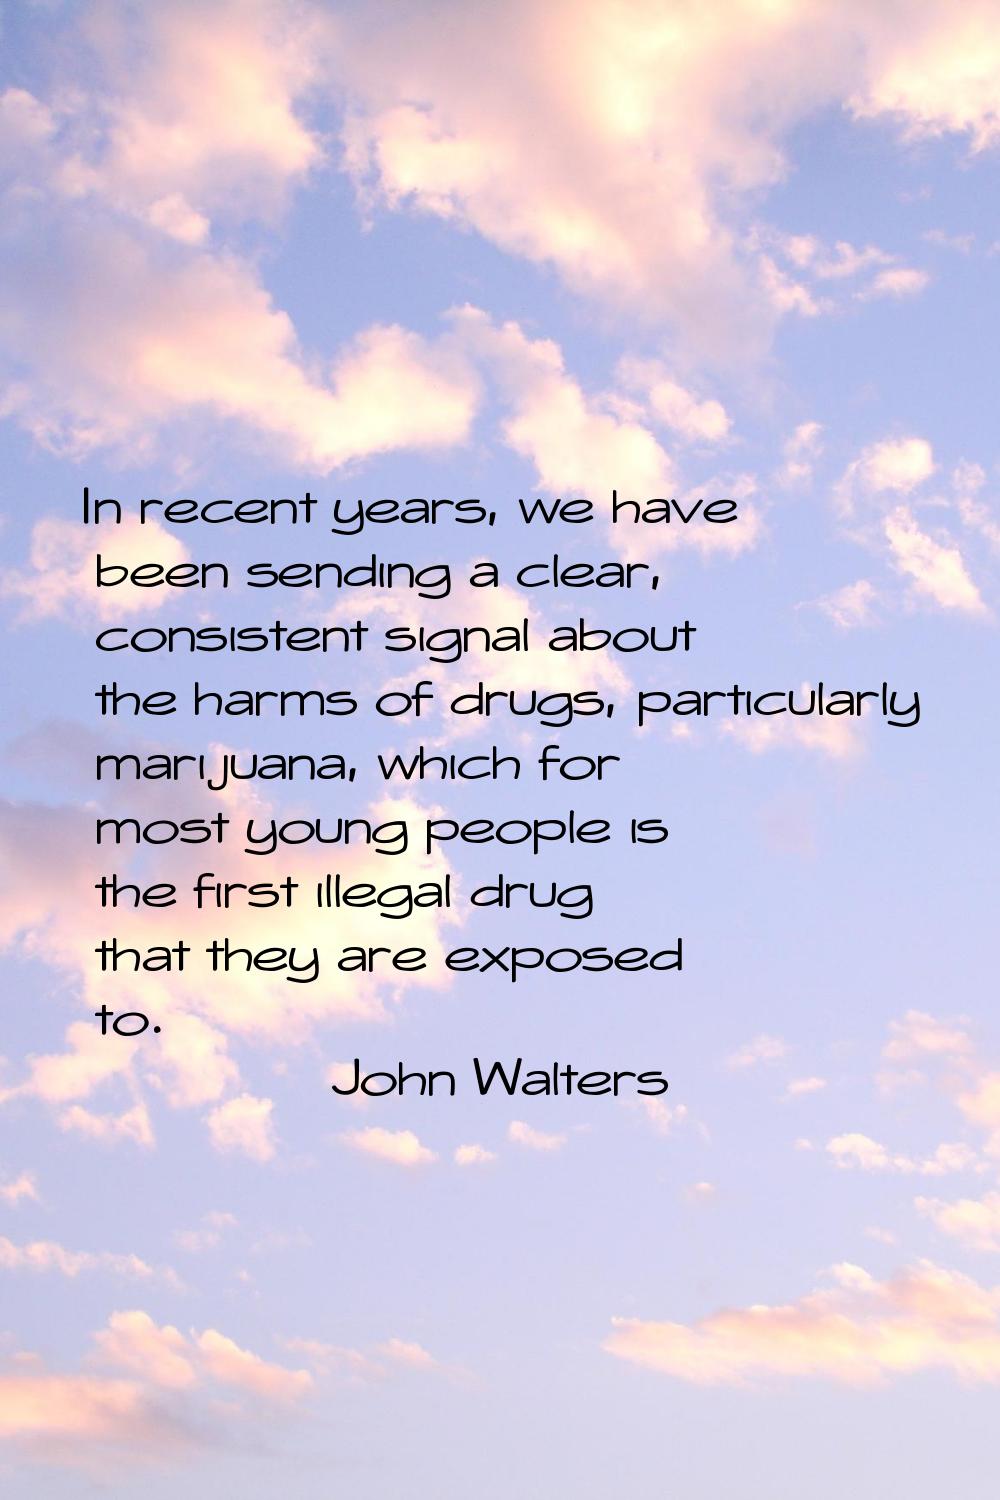 In recent years, we have been sending a clear, consistent signal about the harms of drugs, particul